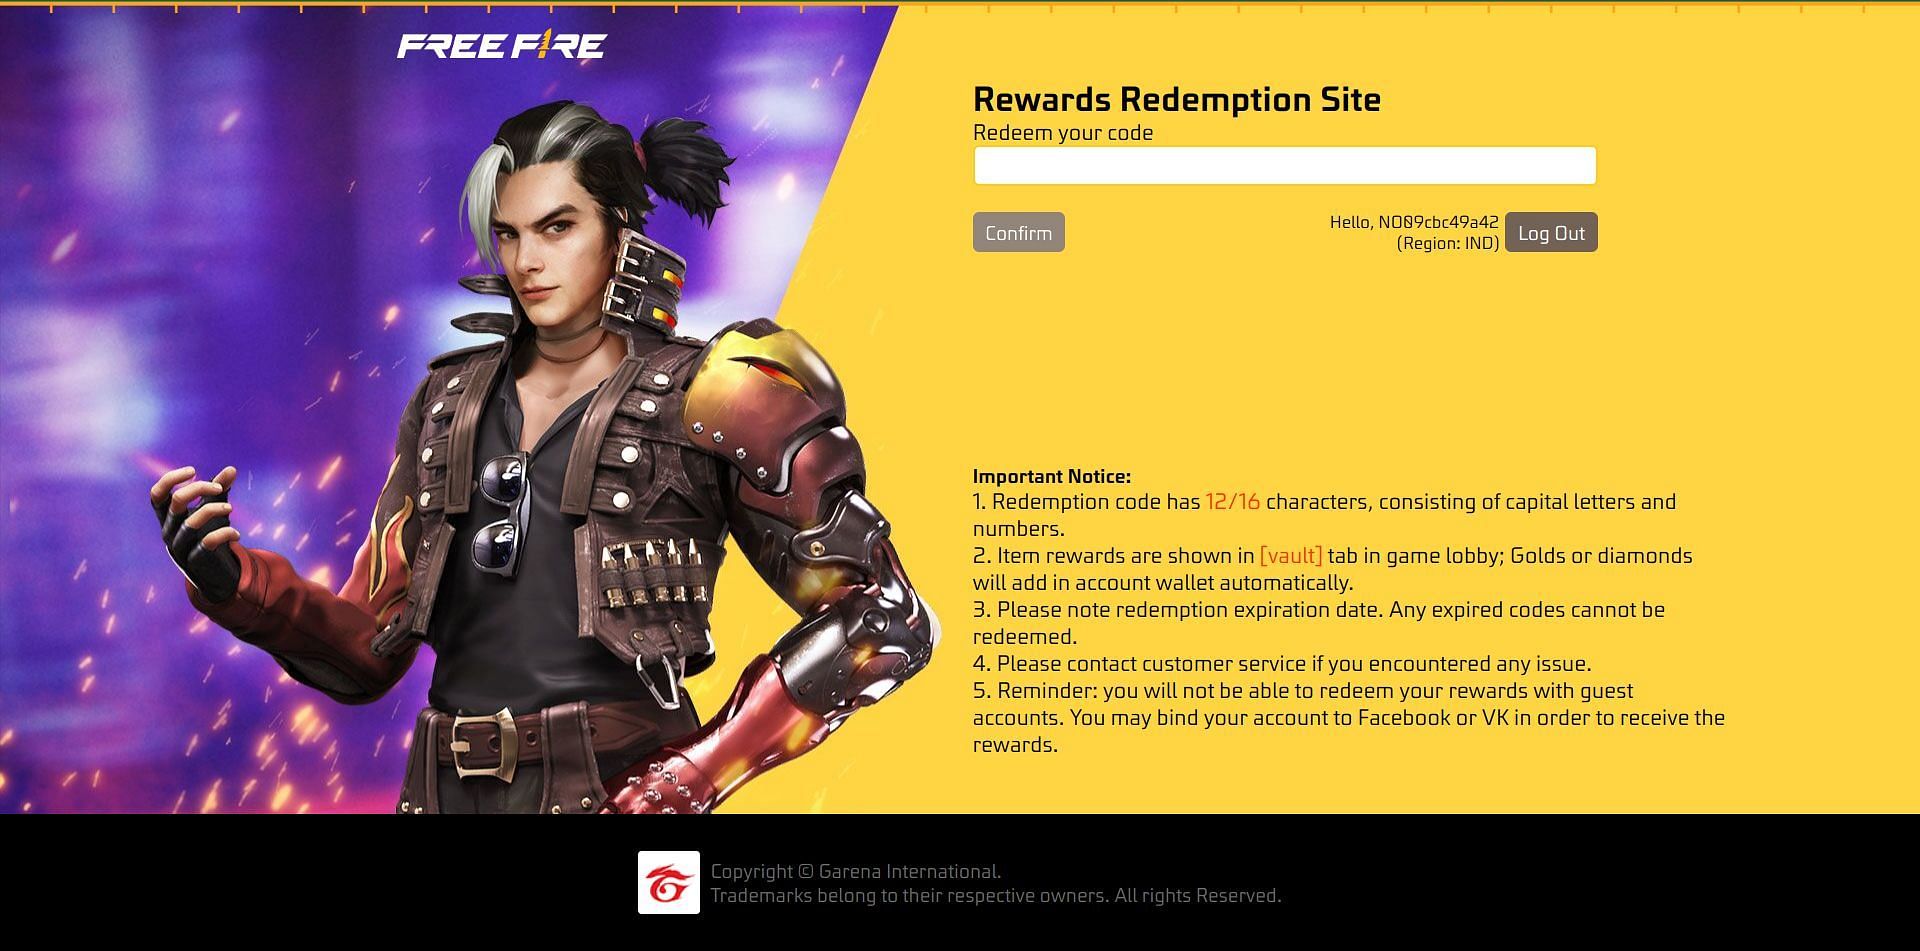 Free Fire Redemption Site (Image by Garena)